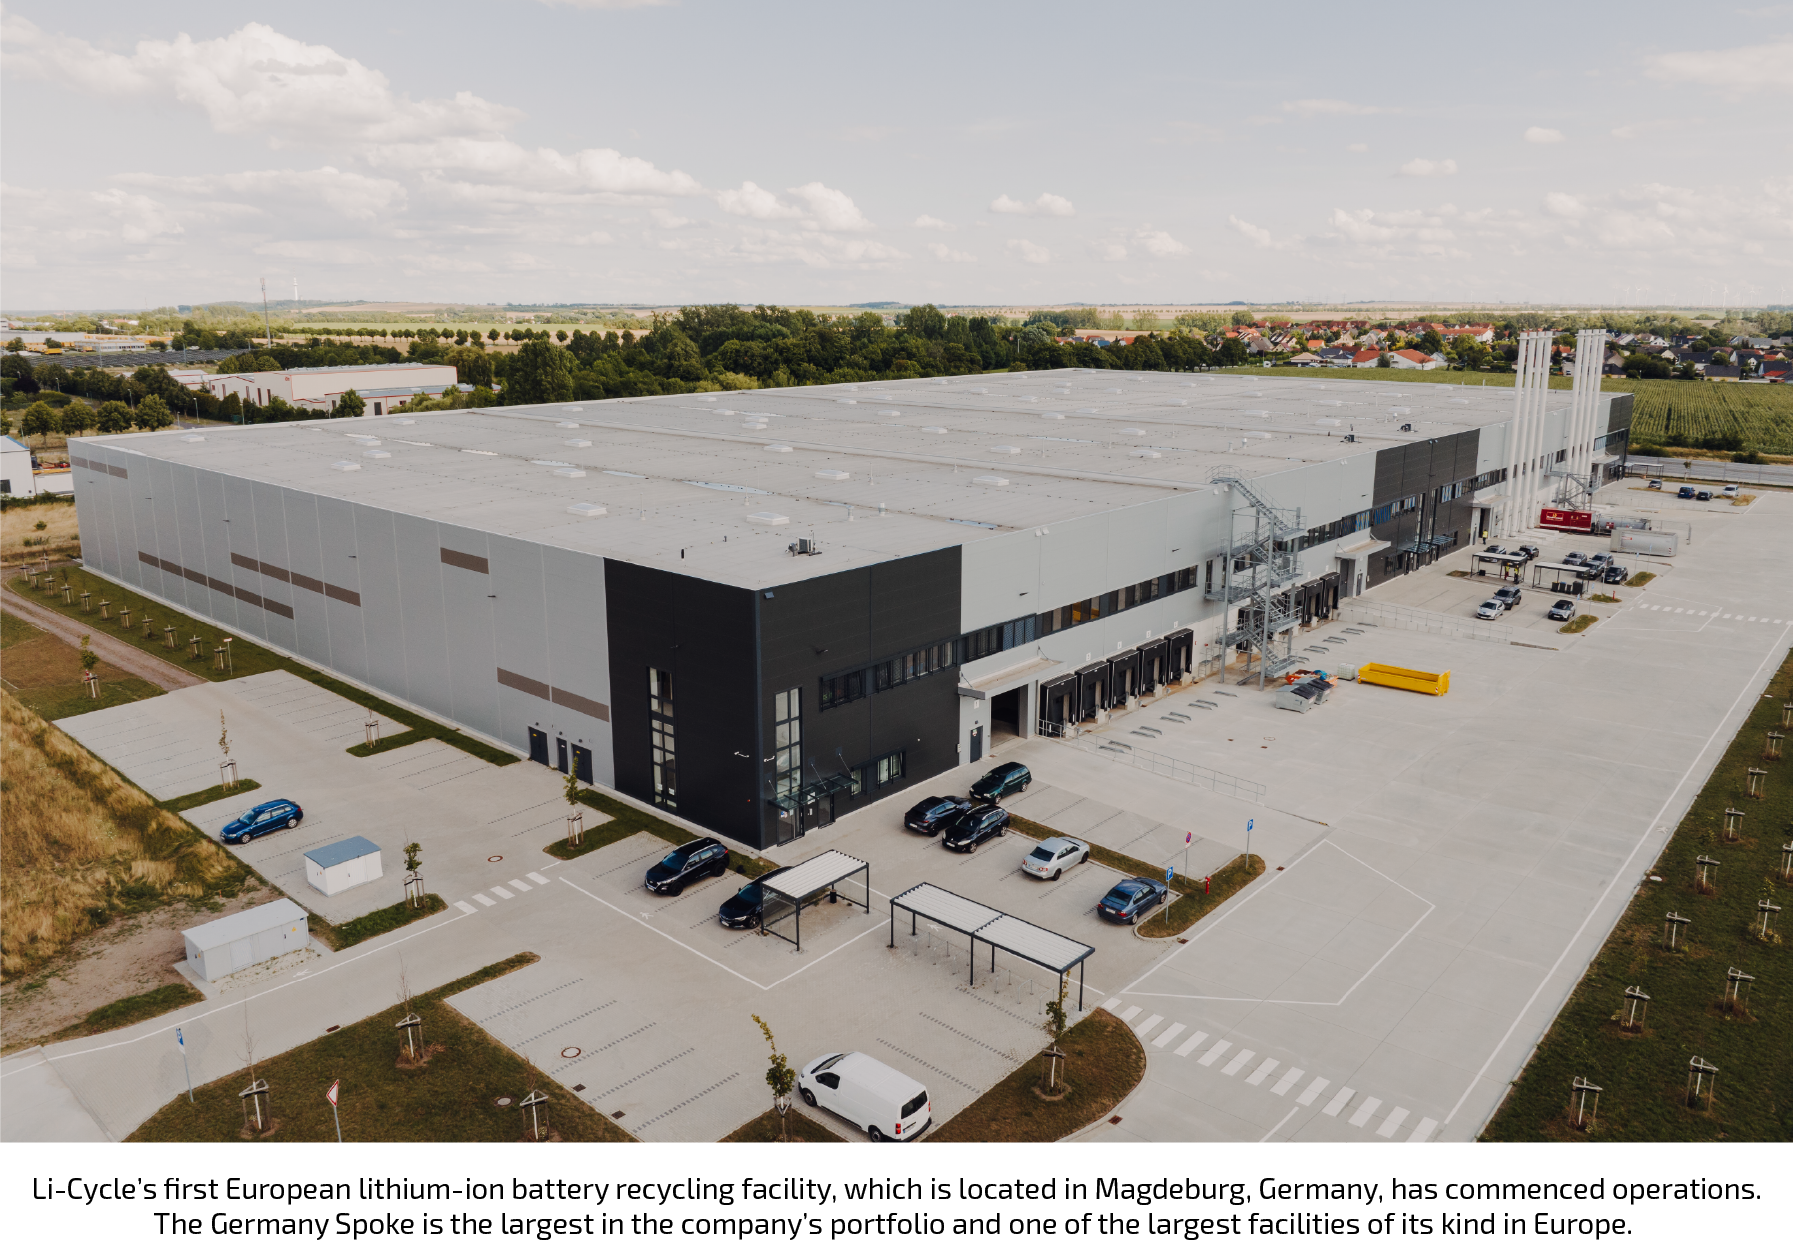 Li-Cycle’s first European lithium-ion battery recycling facility, which is located in Magdeburg, Germany, has commenced operations. The Germany Spoke is the largest in the company’s portfolio and one of the largest facilities of its kind in Europe.